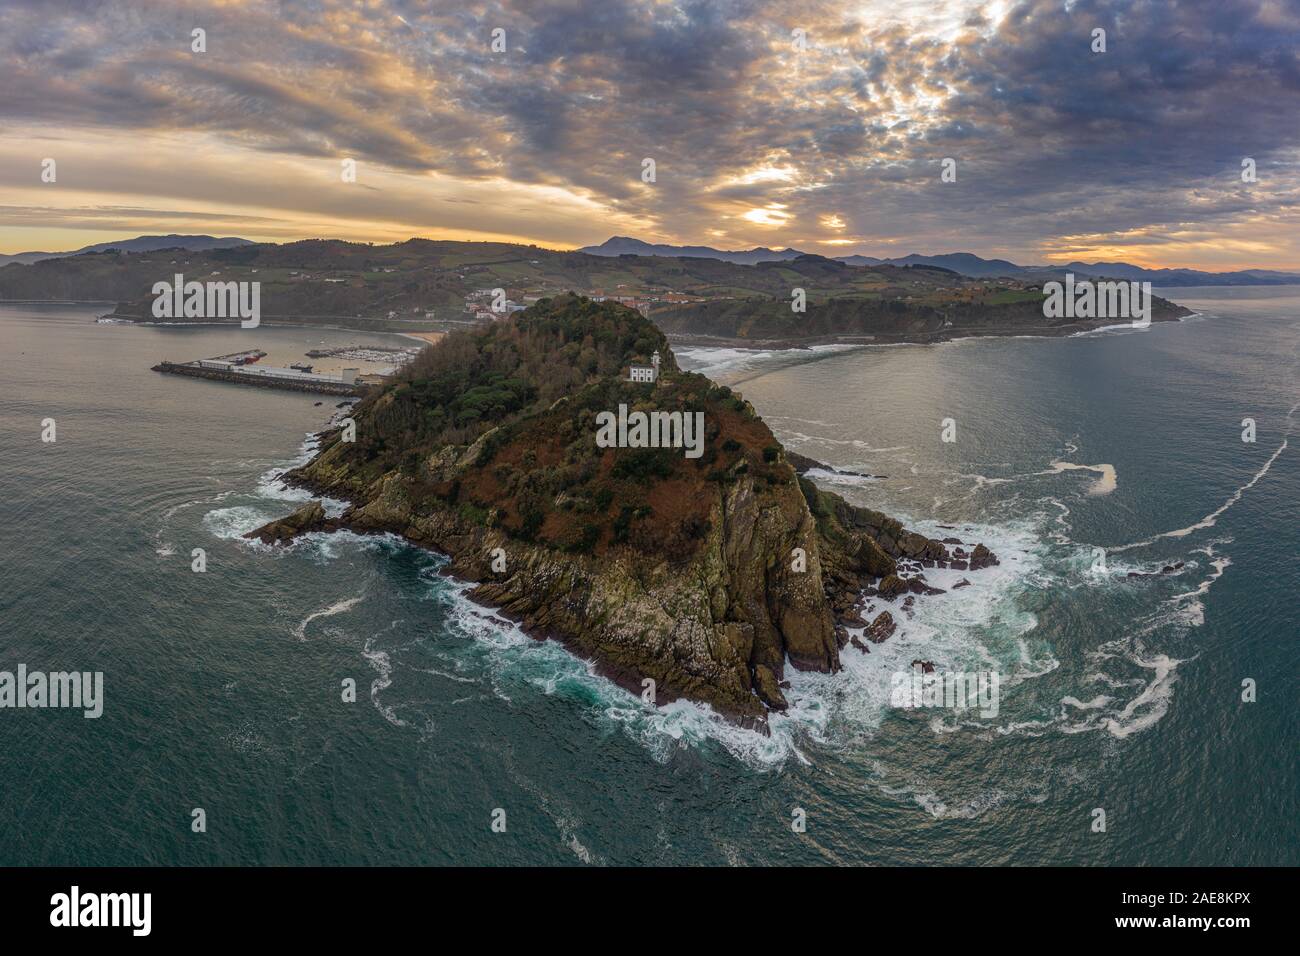 Getaria lighthouse at dusk, Basque country - drone aerial view Stock Photo